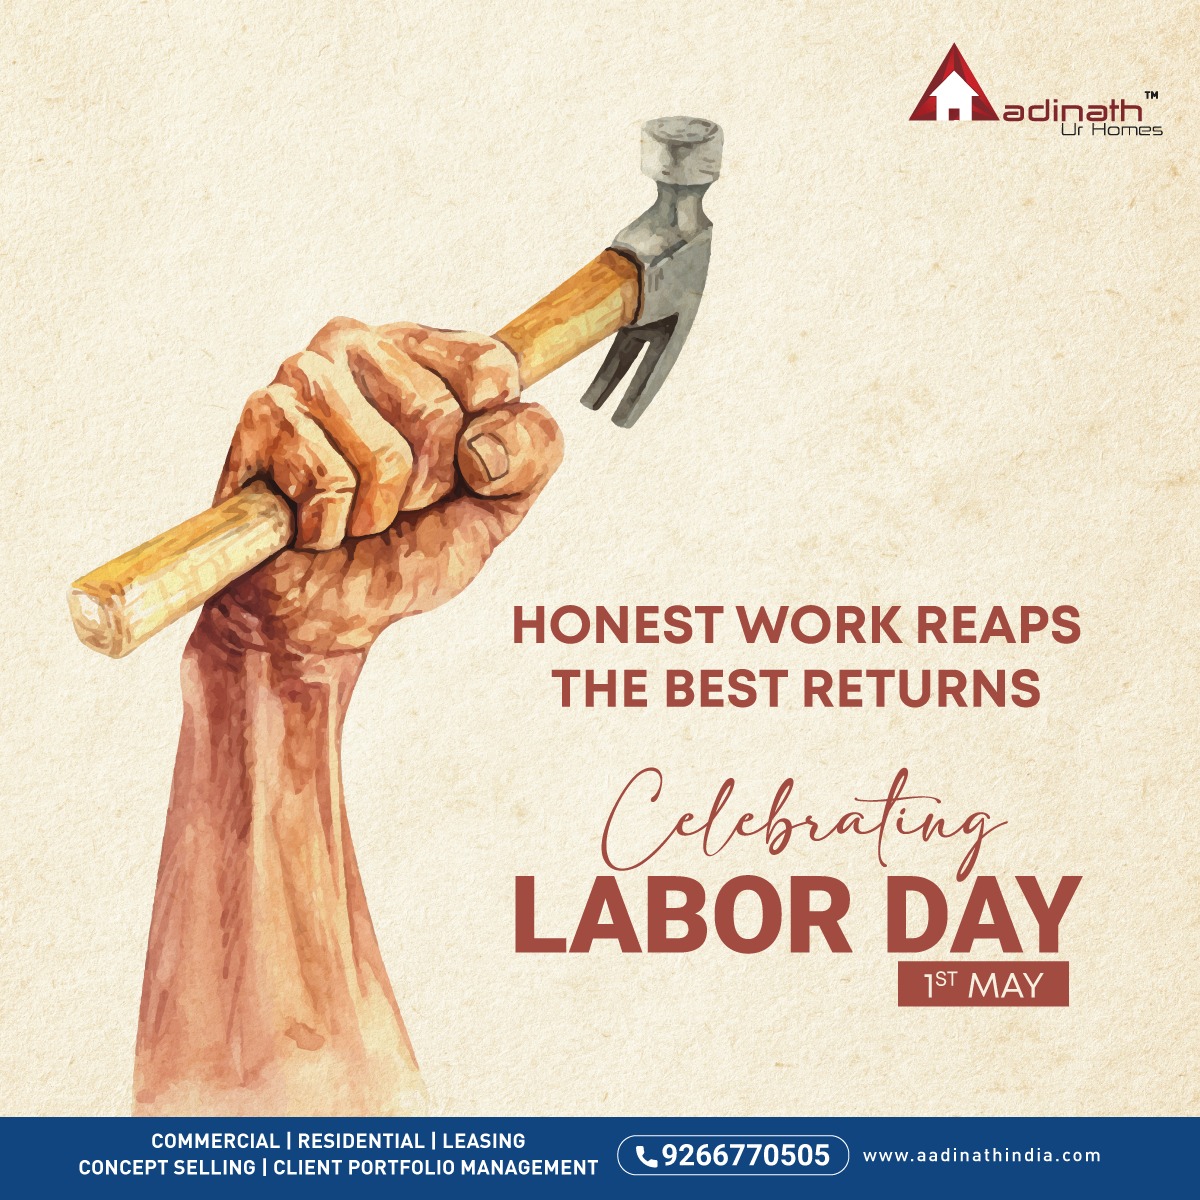 The best kind of labour is the one that comes from a place of conviction, passion and courage. May your labours bear fruit. Happy Labour Day. #LabourDay #Conviction #HardWork #Achievement #LaborDay2024 #FruitfulEndeavors #AadinathIndia #AadinathUrHomes #OfficeSpace #RetailSpace